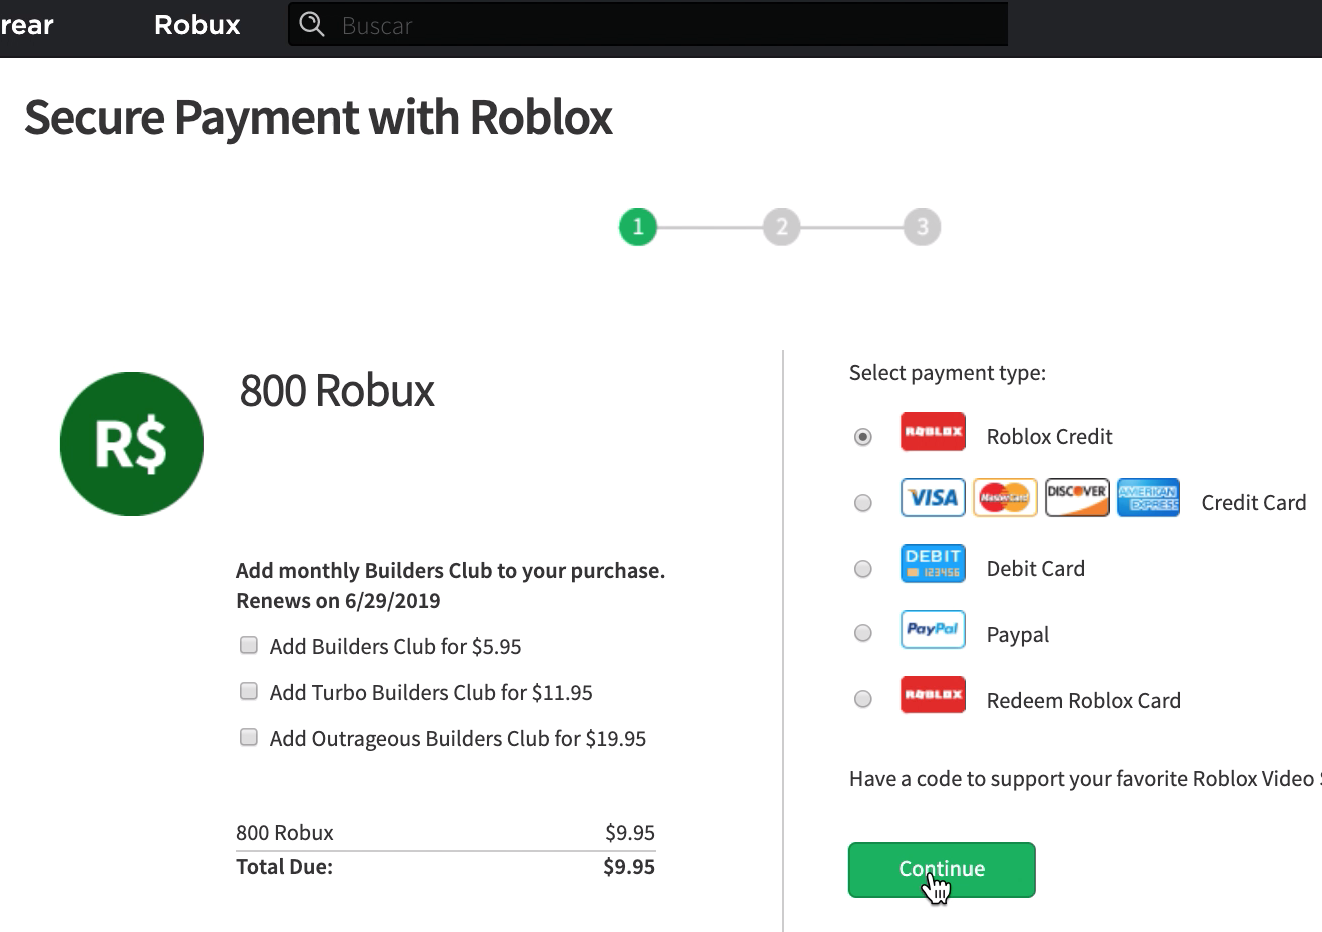 Pin Roblox Card How To Get Free Robux Codes 2019 February - roblox card pins 26$